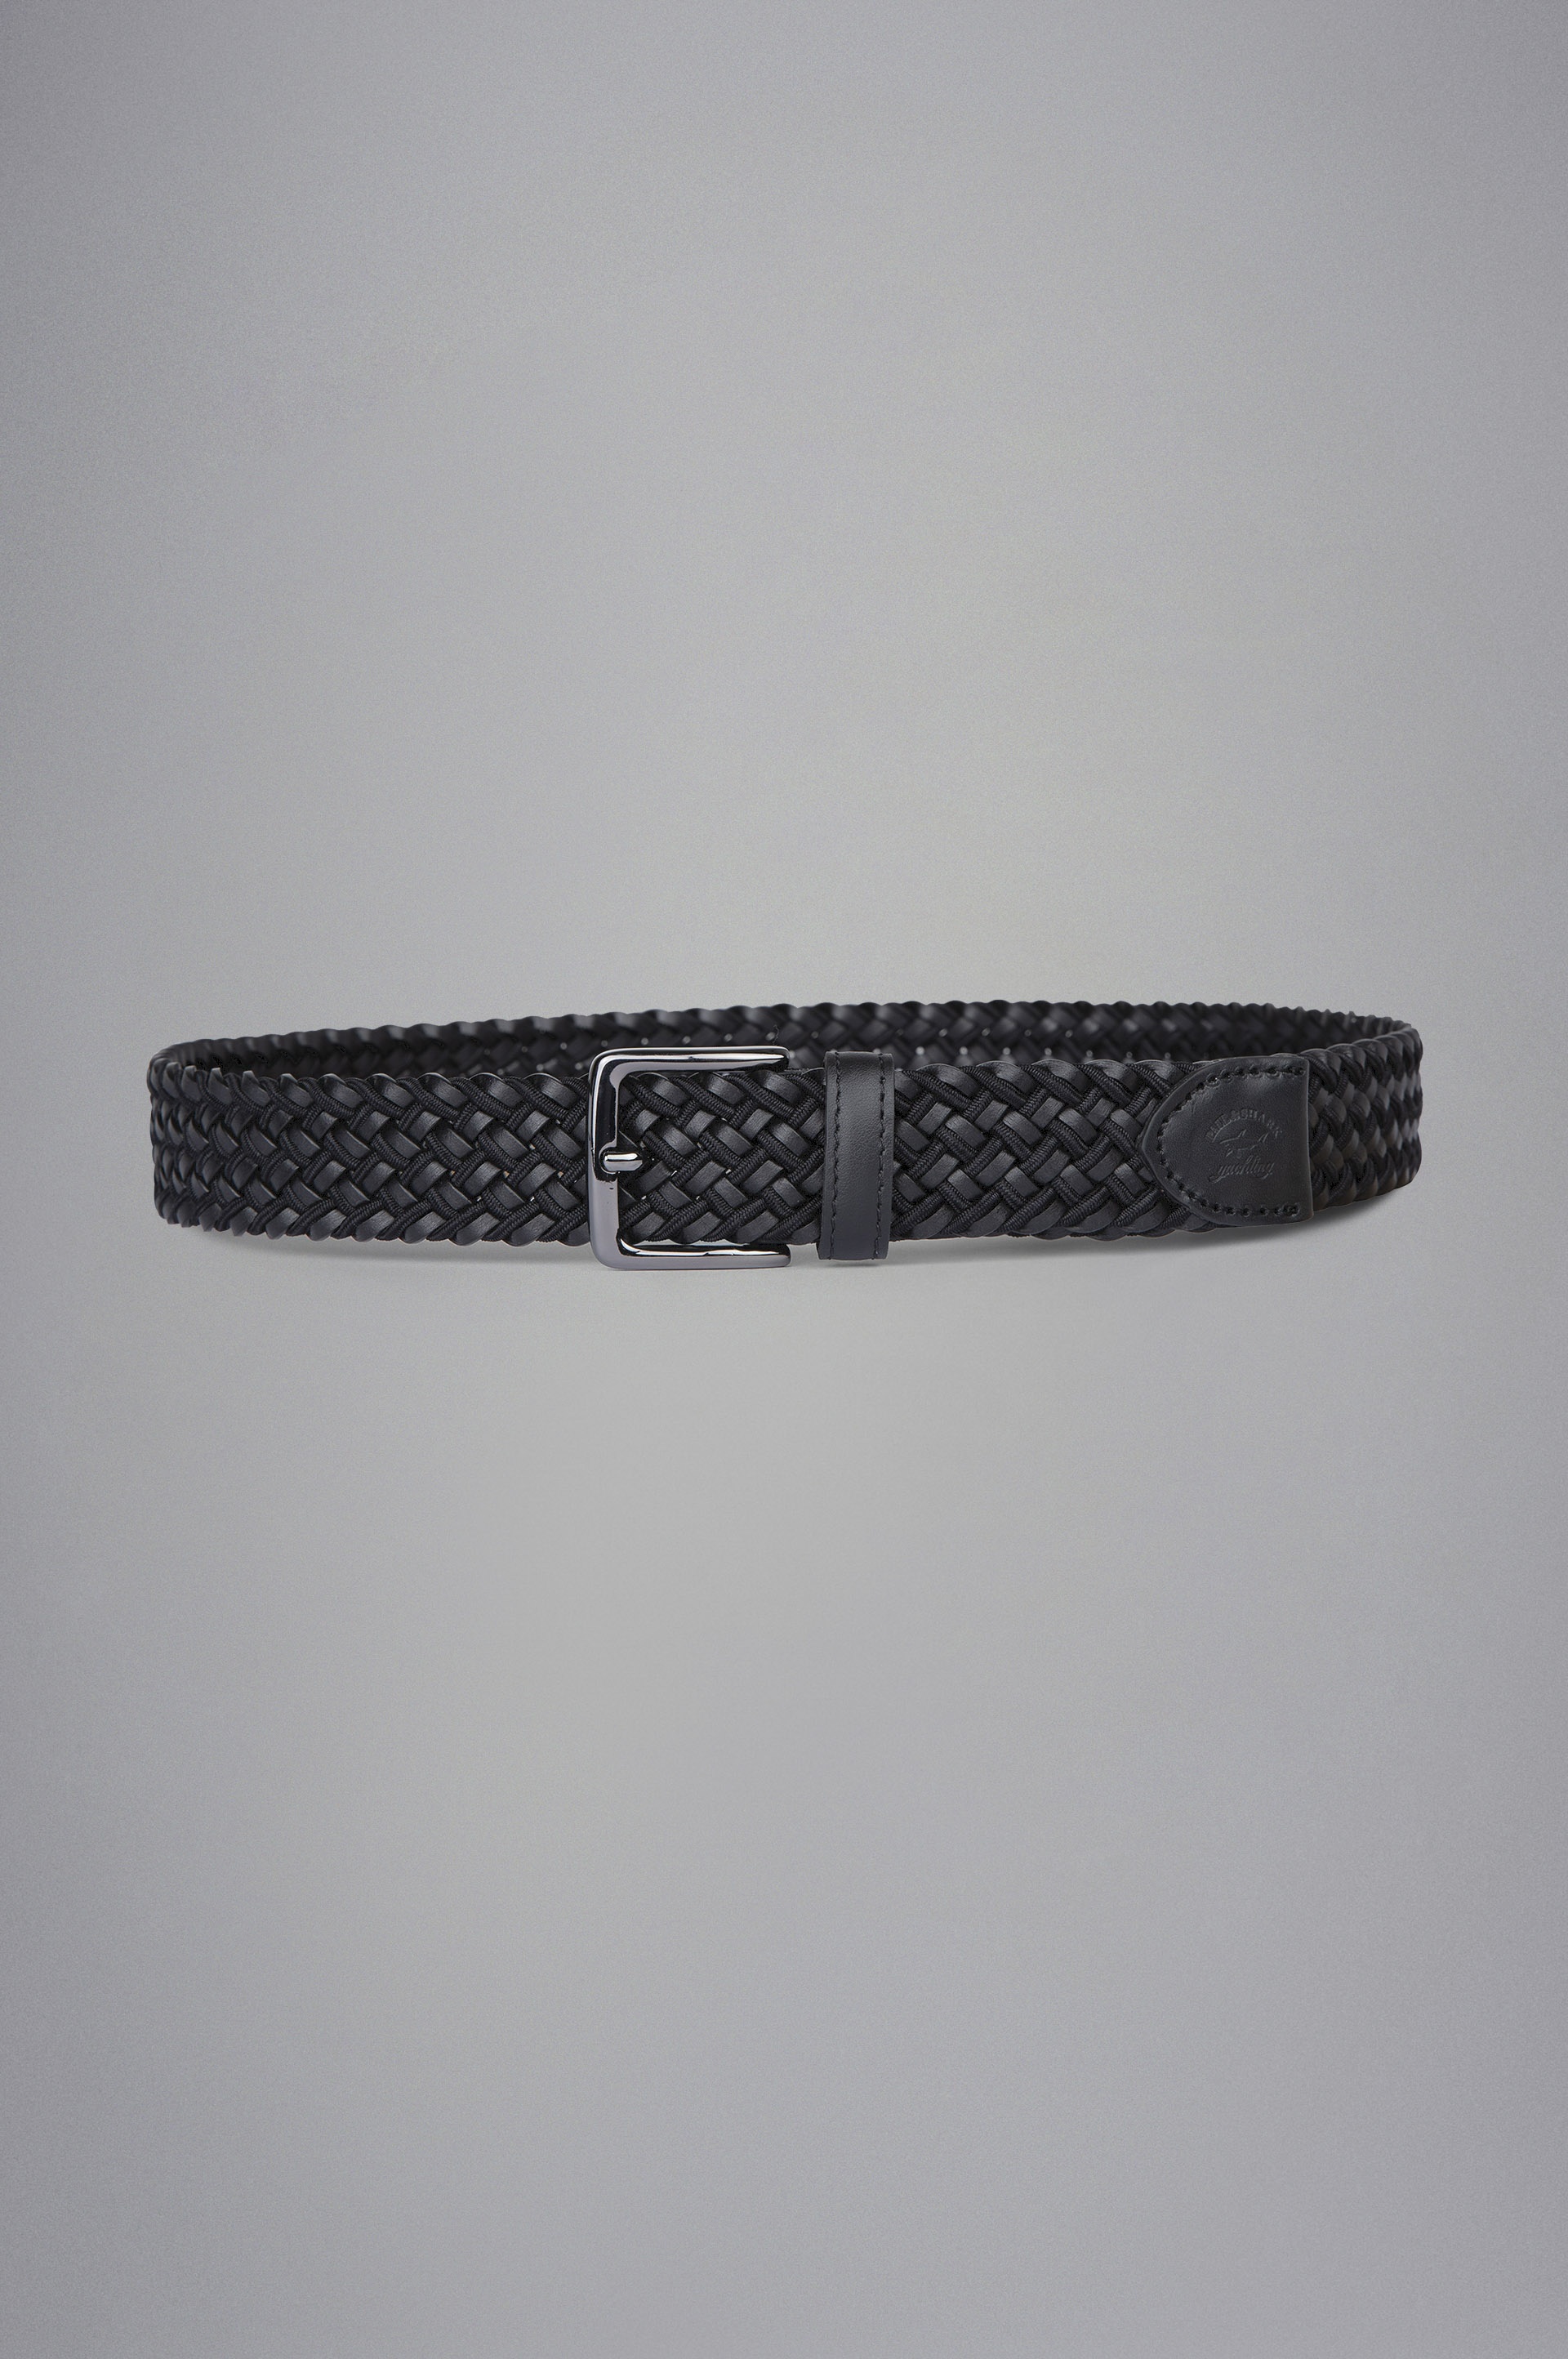 WOVEN LEATHER BELT - 1